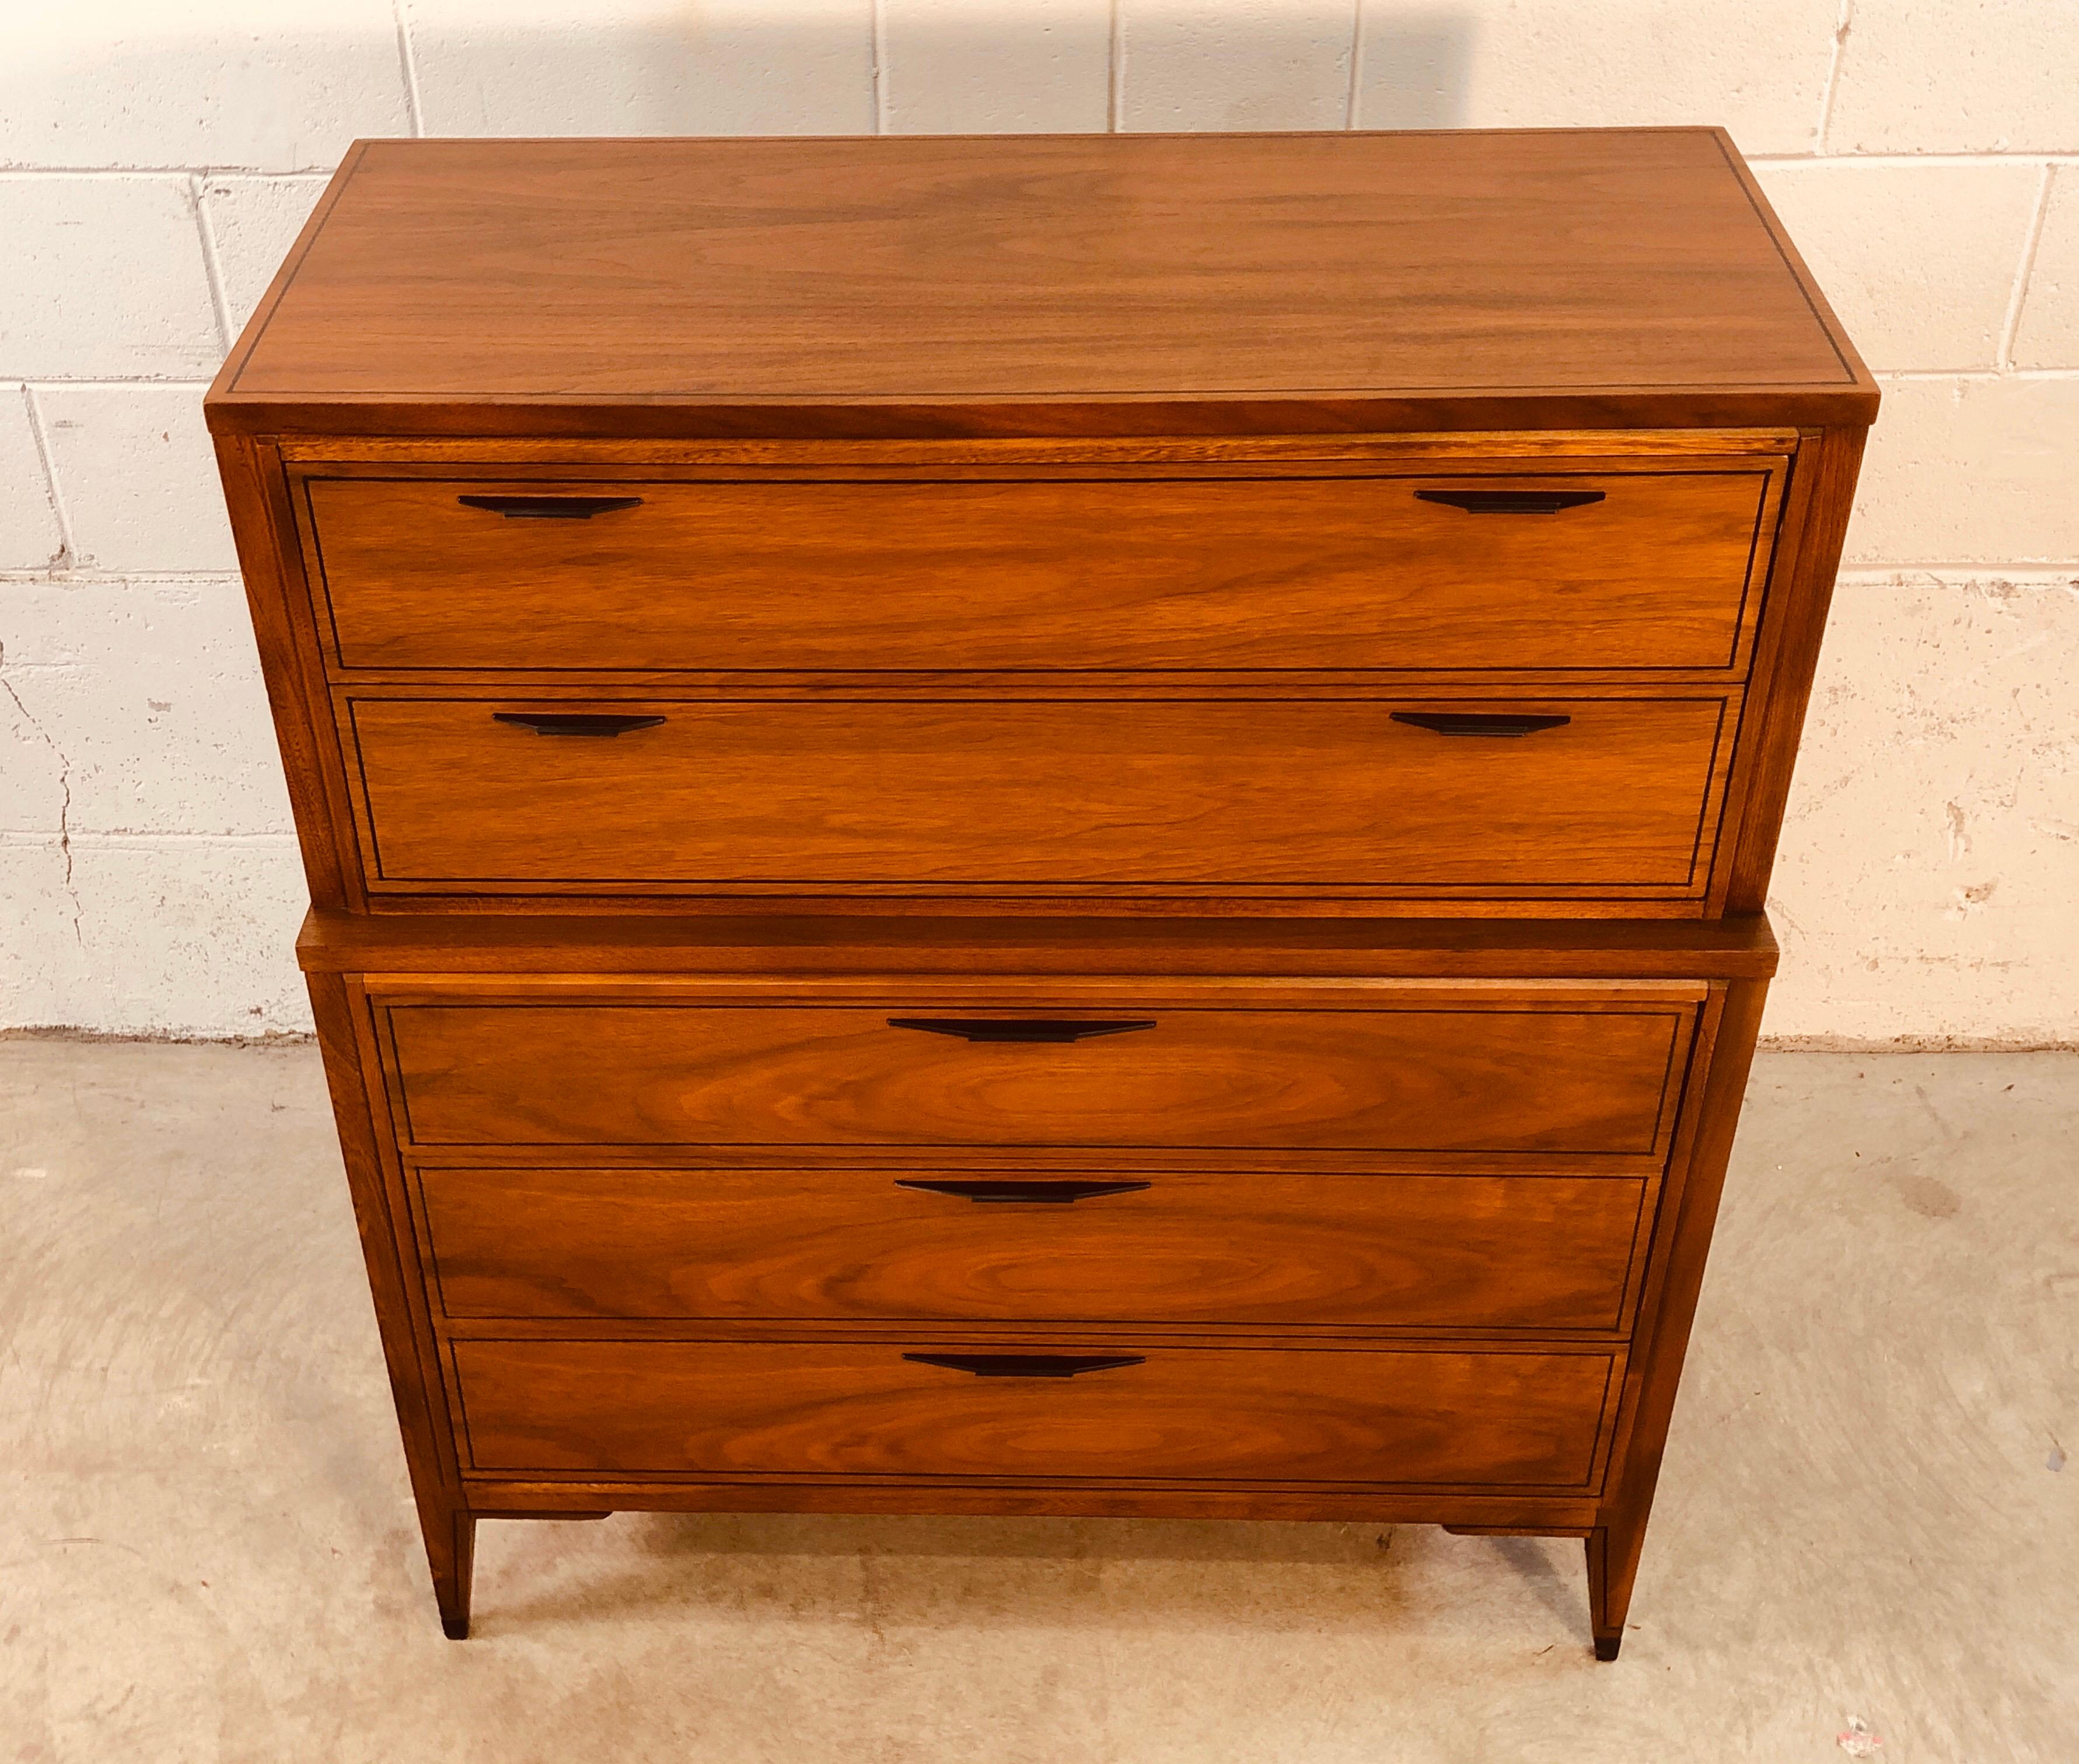 Vintage 1960s tall walnut and elmwood dresser by Kent Coffey for the Tempo line. The dresser has 5 drawers for storage. Two drawers are 4.25” H and three drawers are 5.5” H. Black metal pulls have been refinished. Excellent condition.